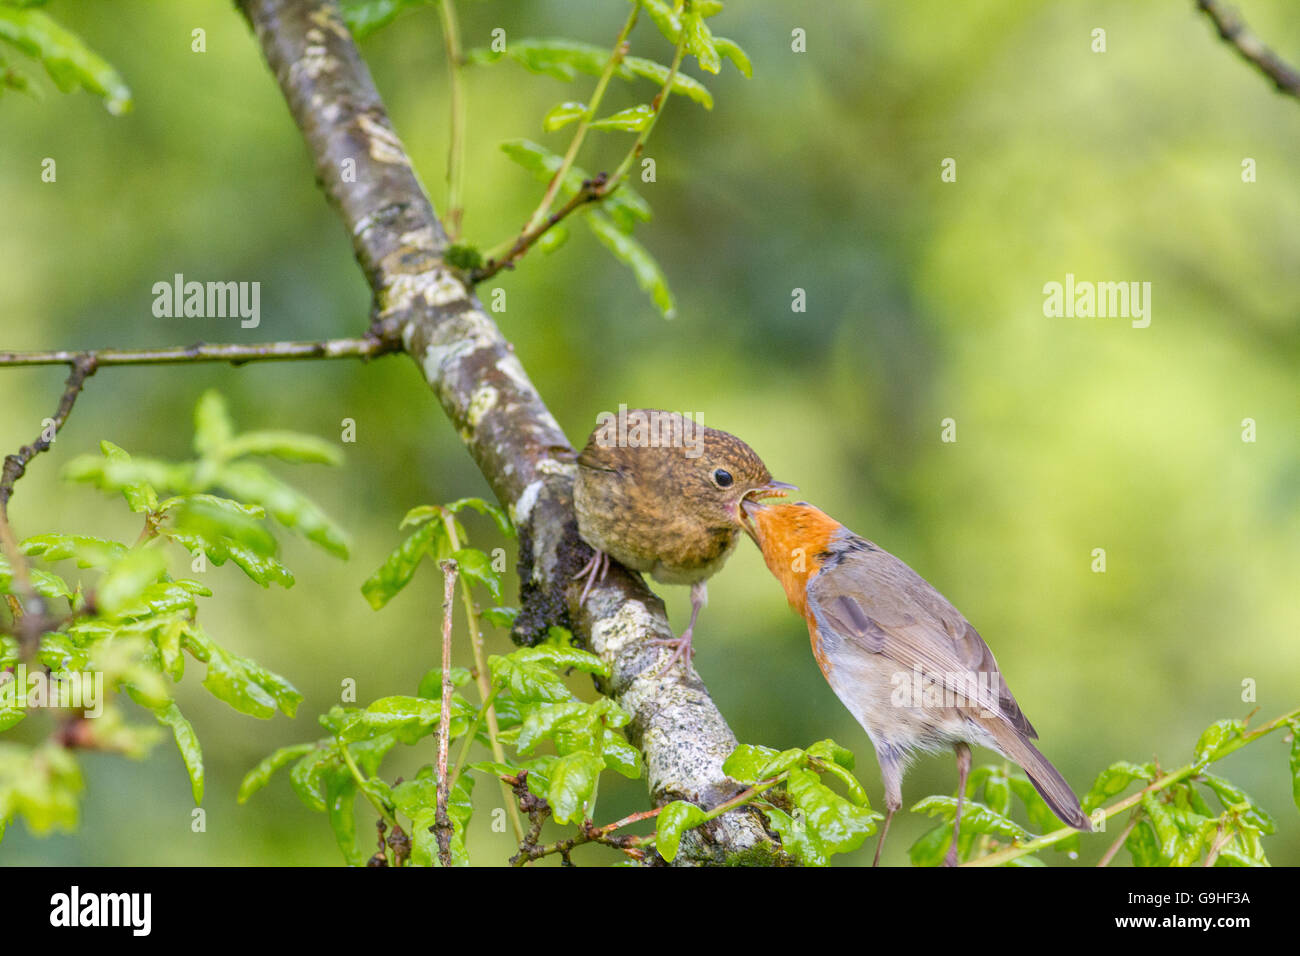 European Robin parent feeding his youngster in a tree.  The background is a natural green, they are in a woods. Stock Photo